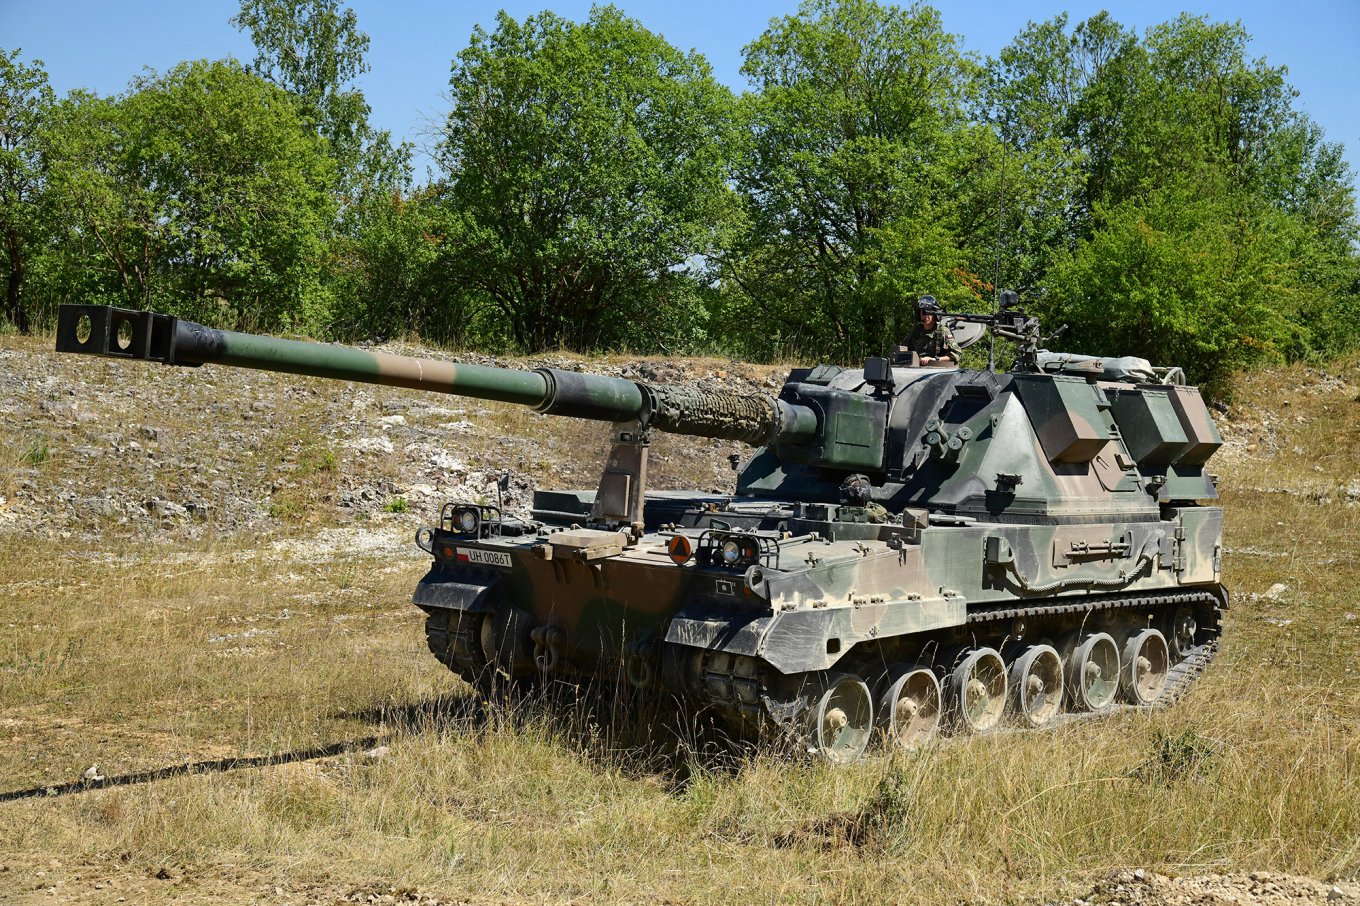 Artillery Update in Ukraine: How Many Needed, How Long It Takes, Why Trophy Msta-S SPG’s Can Still Be in Service For Long, Defense Express, war in Ukraine, Russian-Ukrainian war